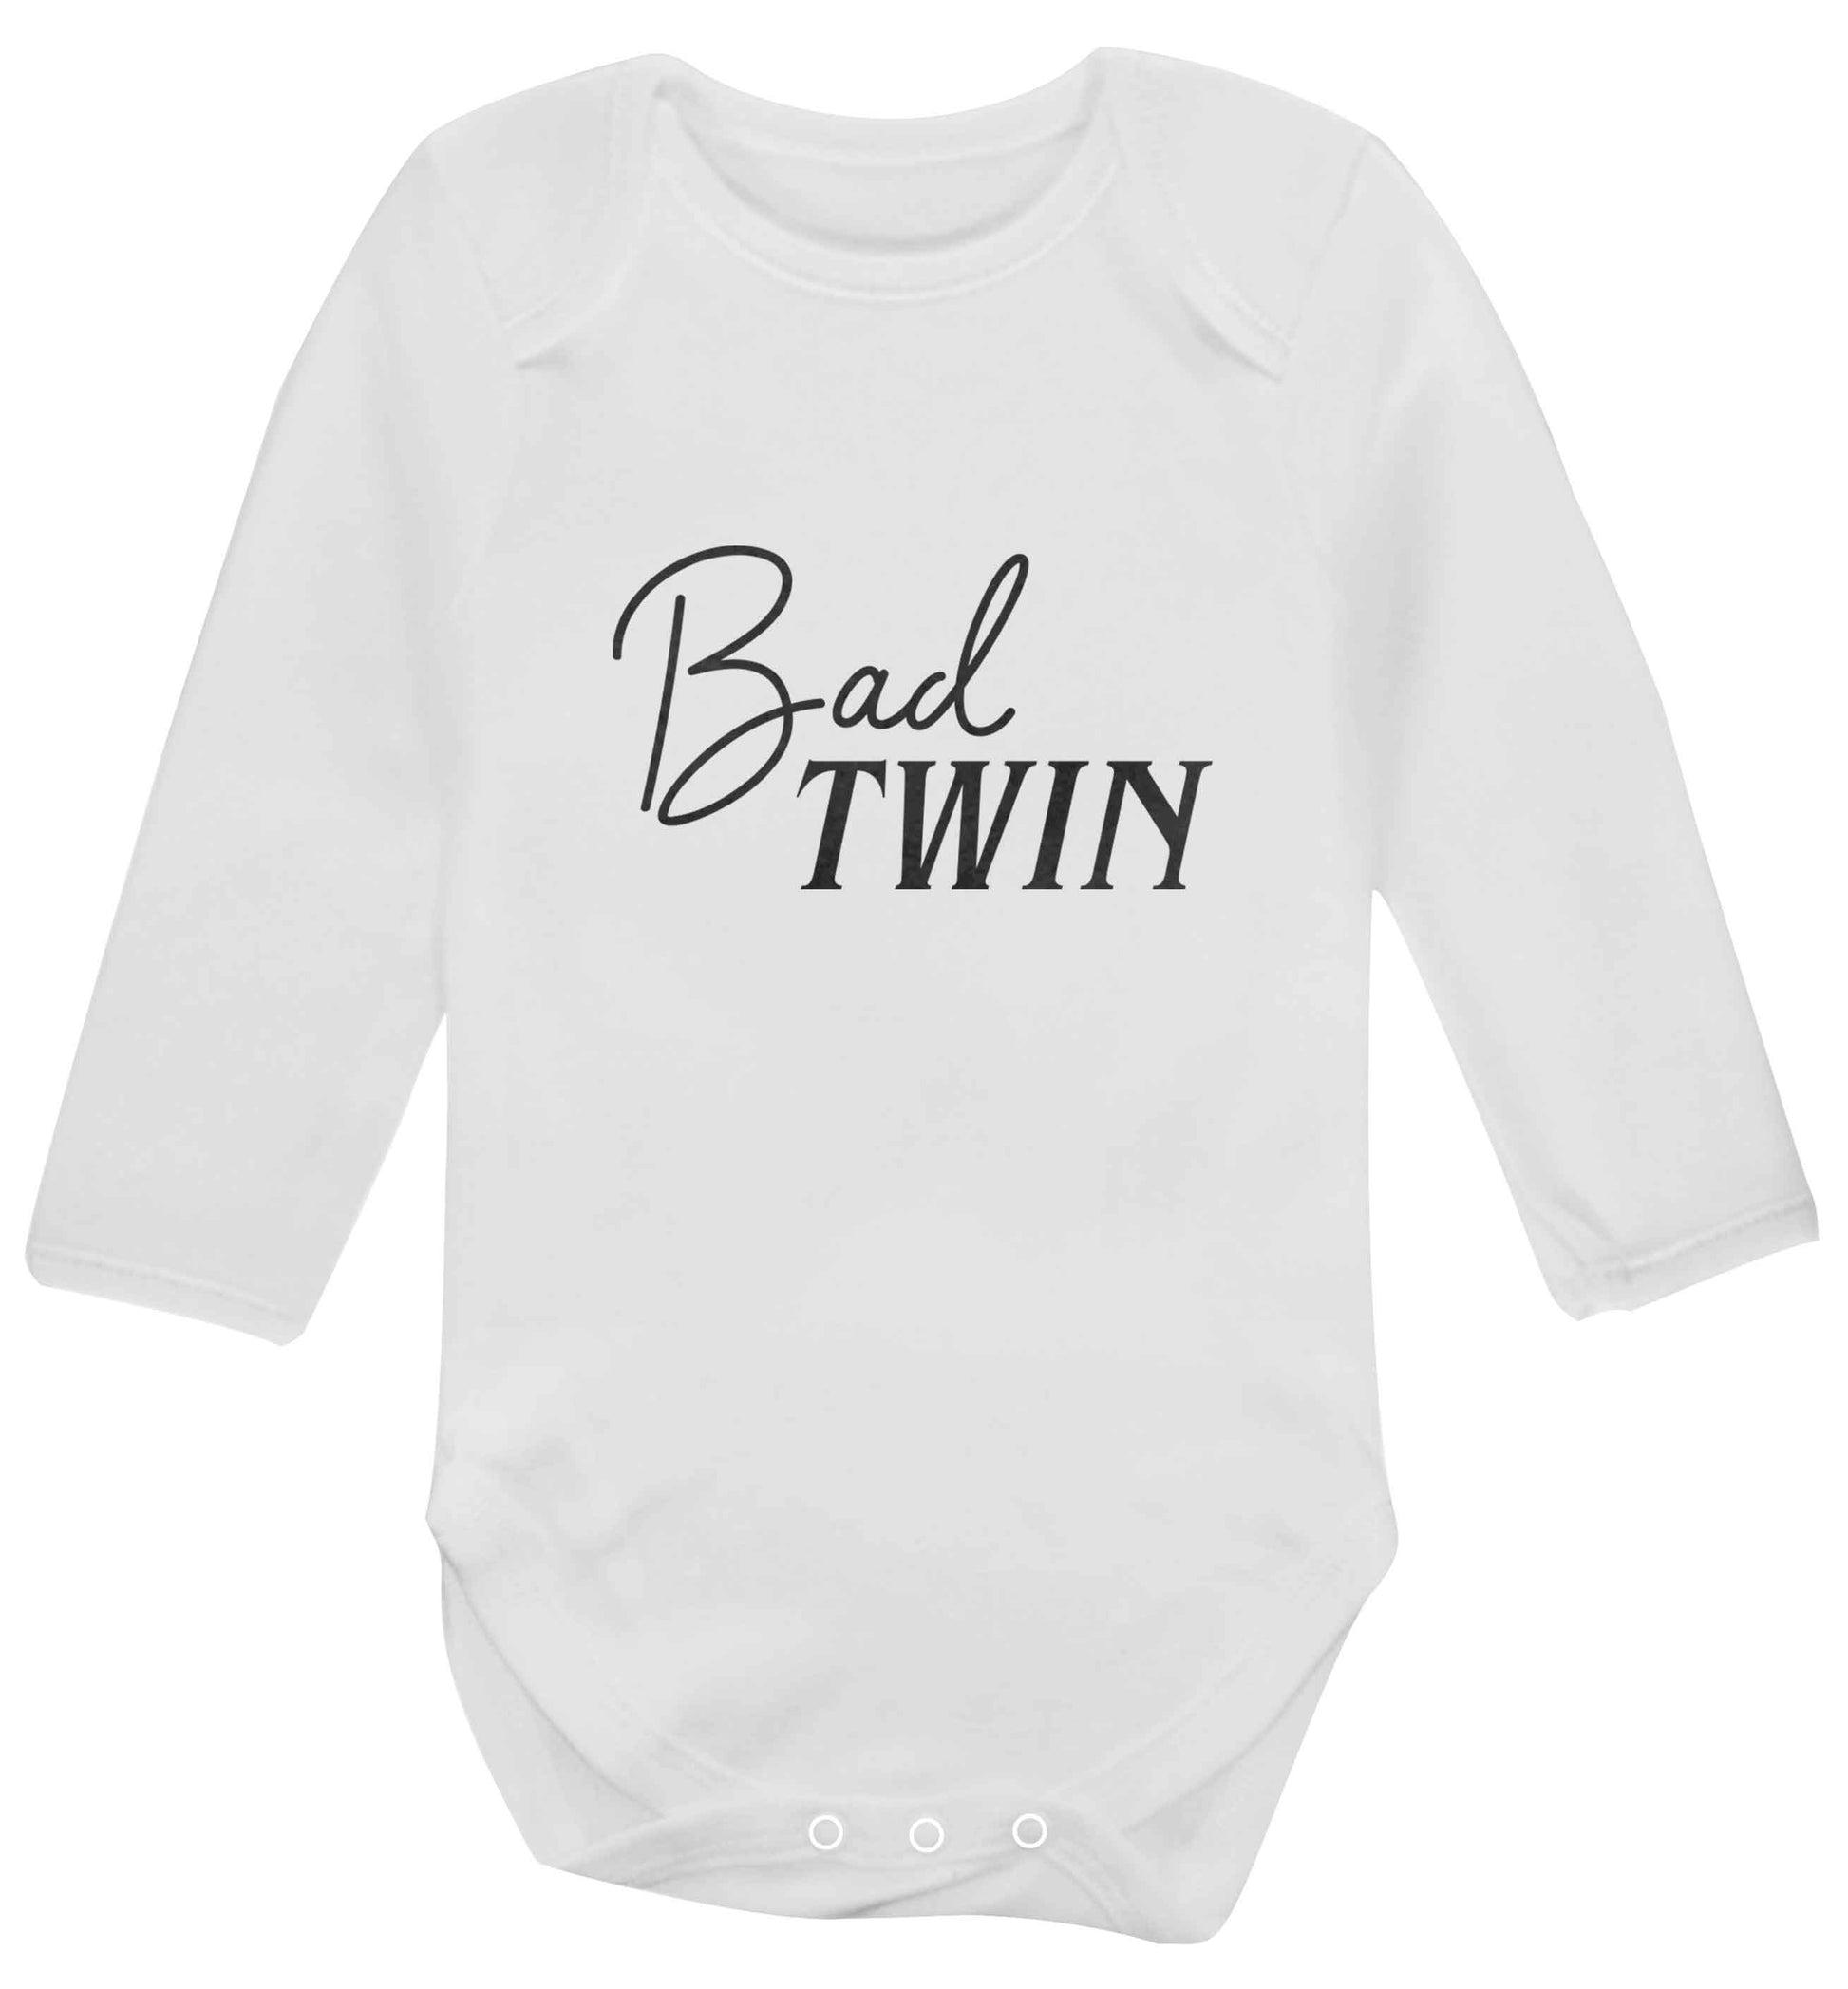 Bad twin baby vest long sleeved white 6-12 months